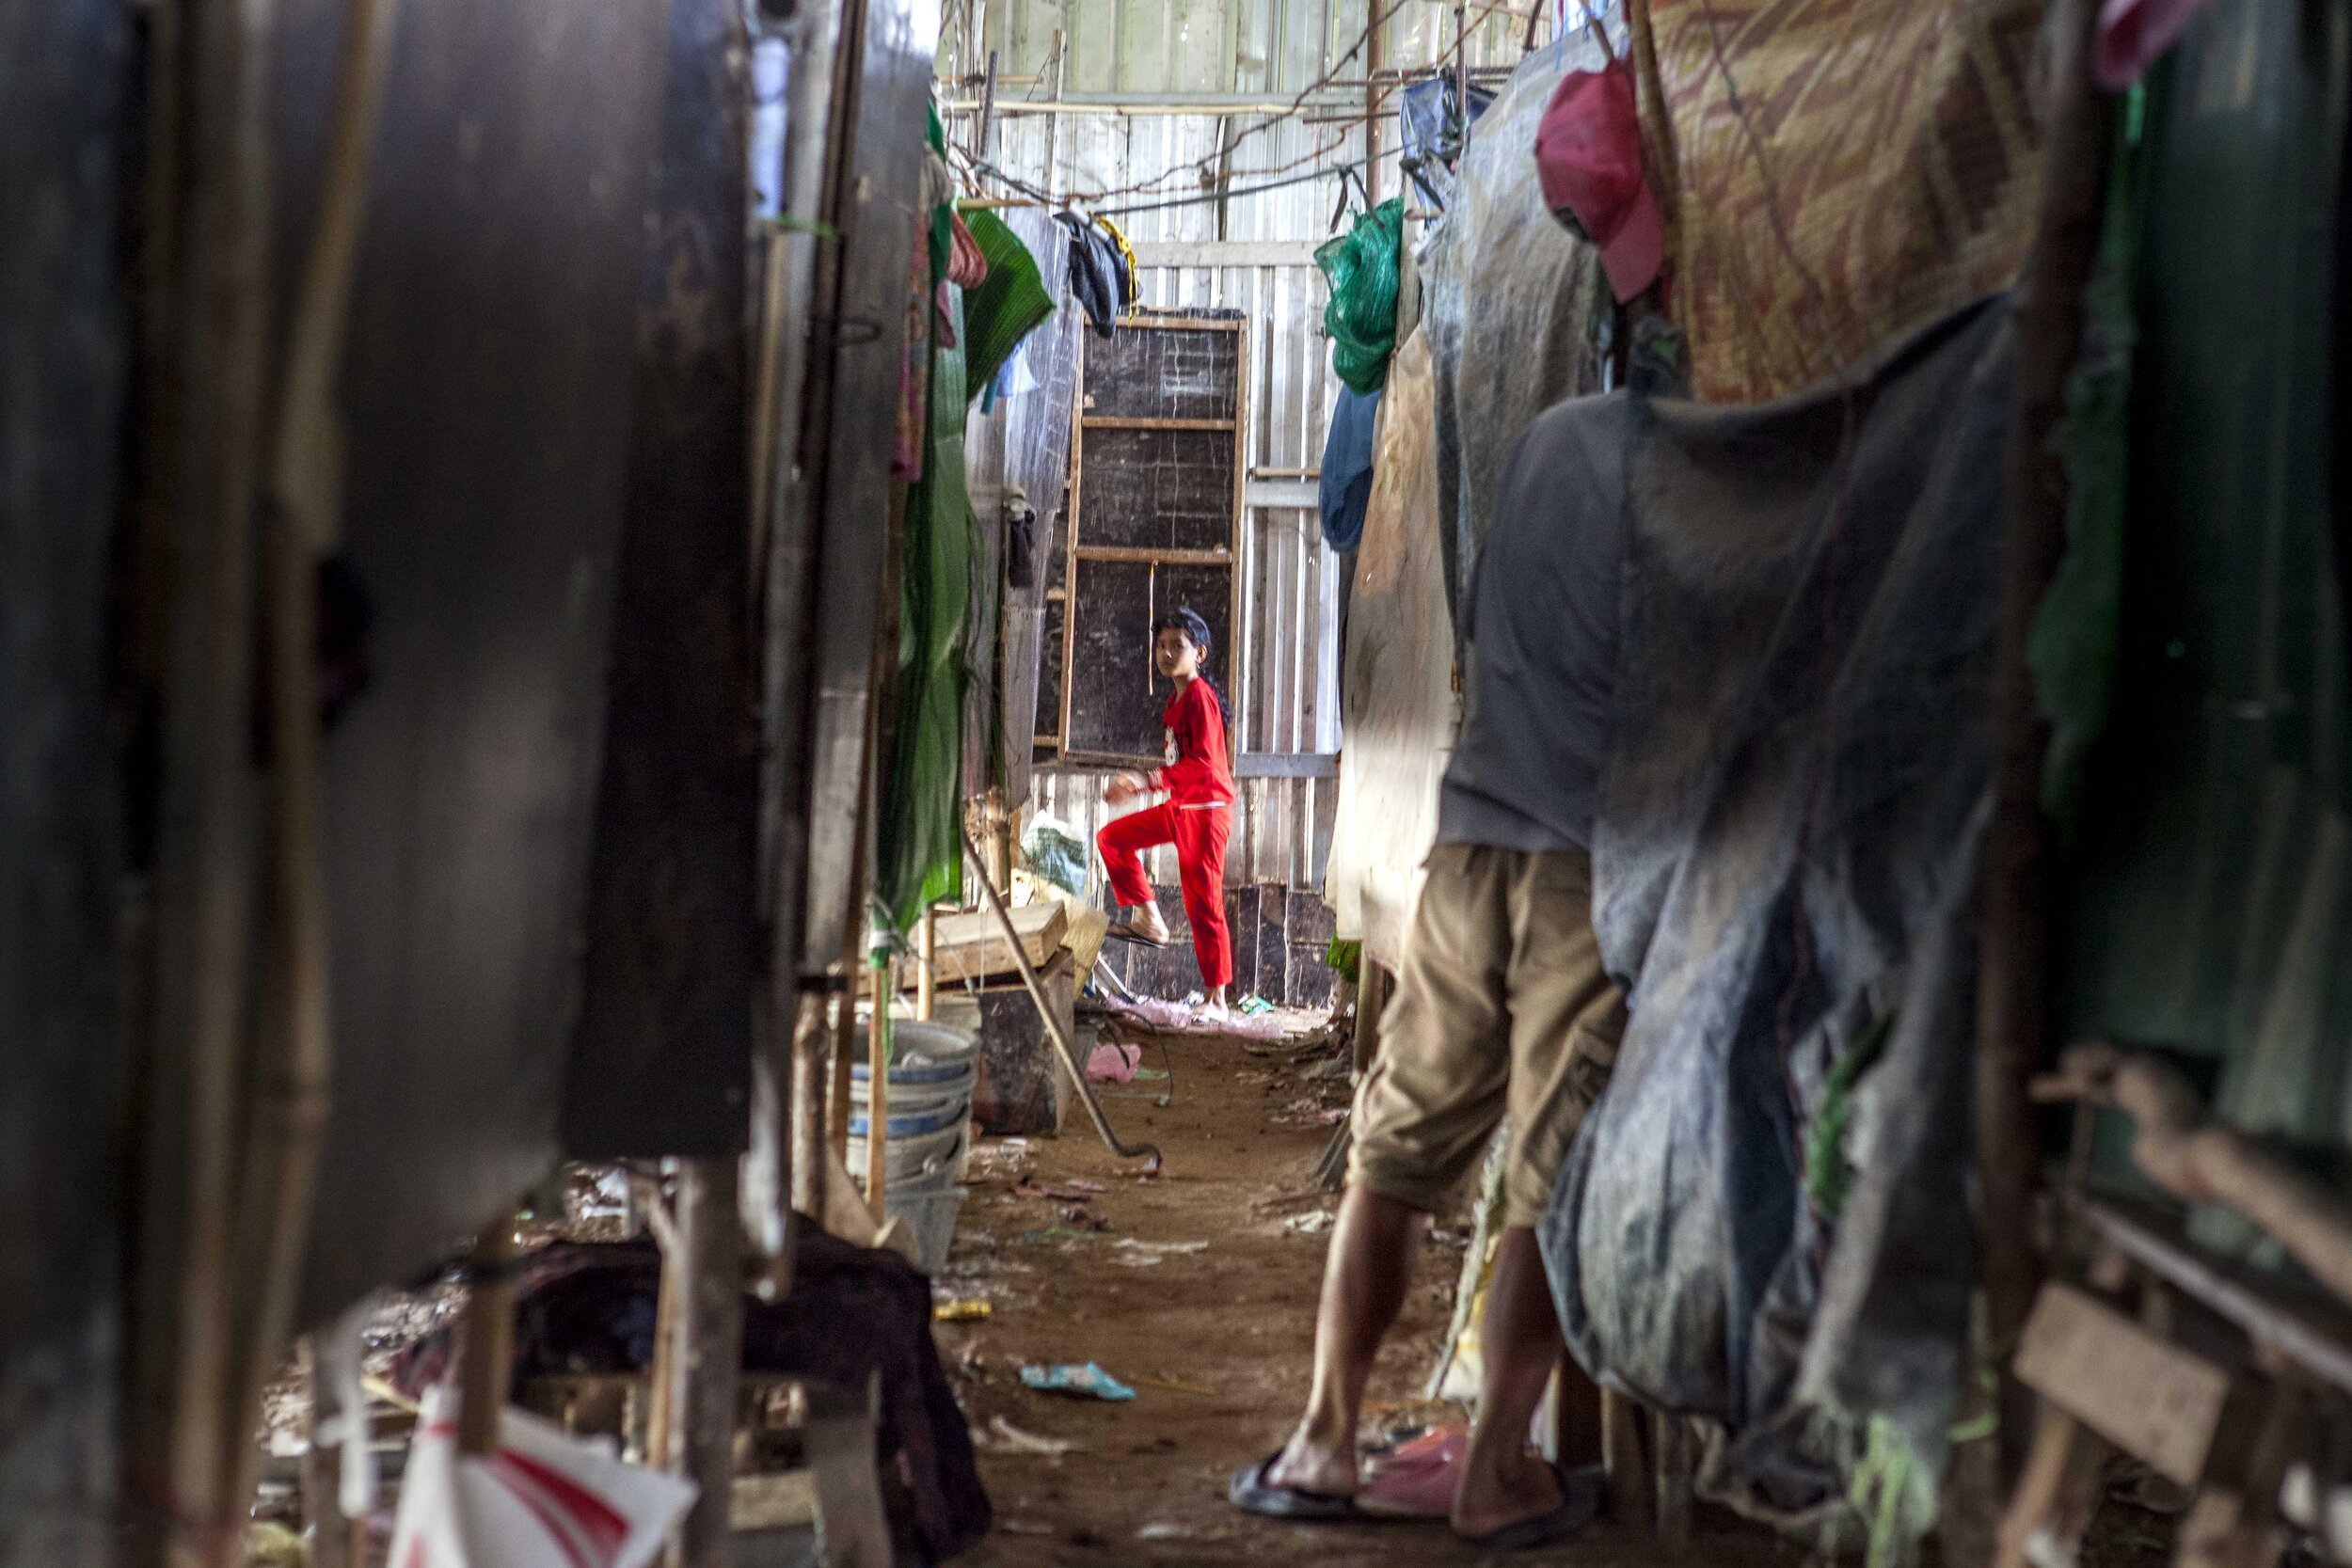  Inside the single, narrow alley in a shed built by the construction company to house its workers on the build site of the 'Phnom Penh City Centre' development. Where employers do provide accommodation for their workers, provisions are rudimentary at